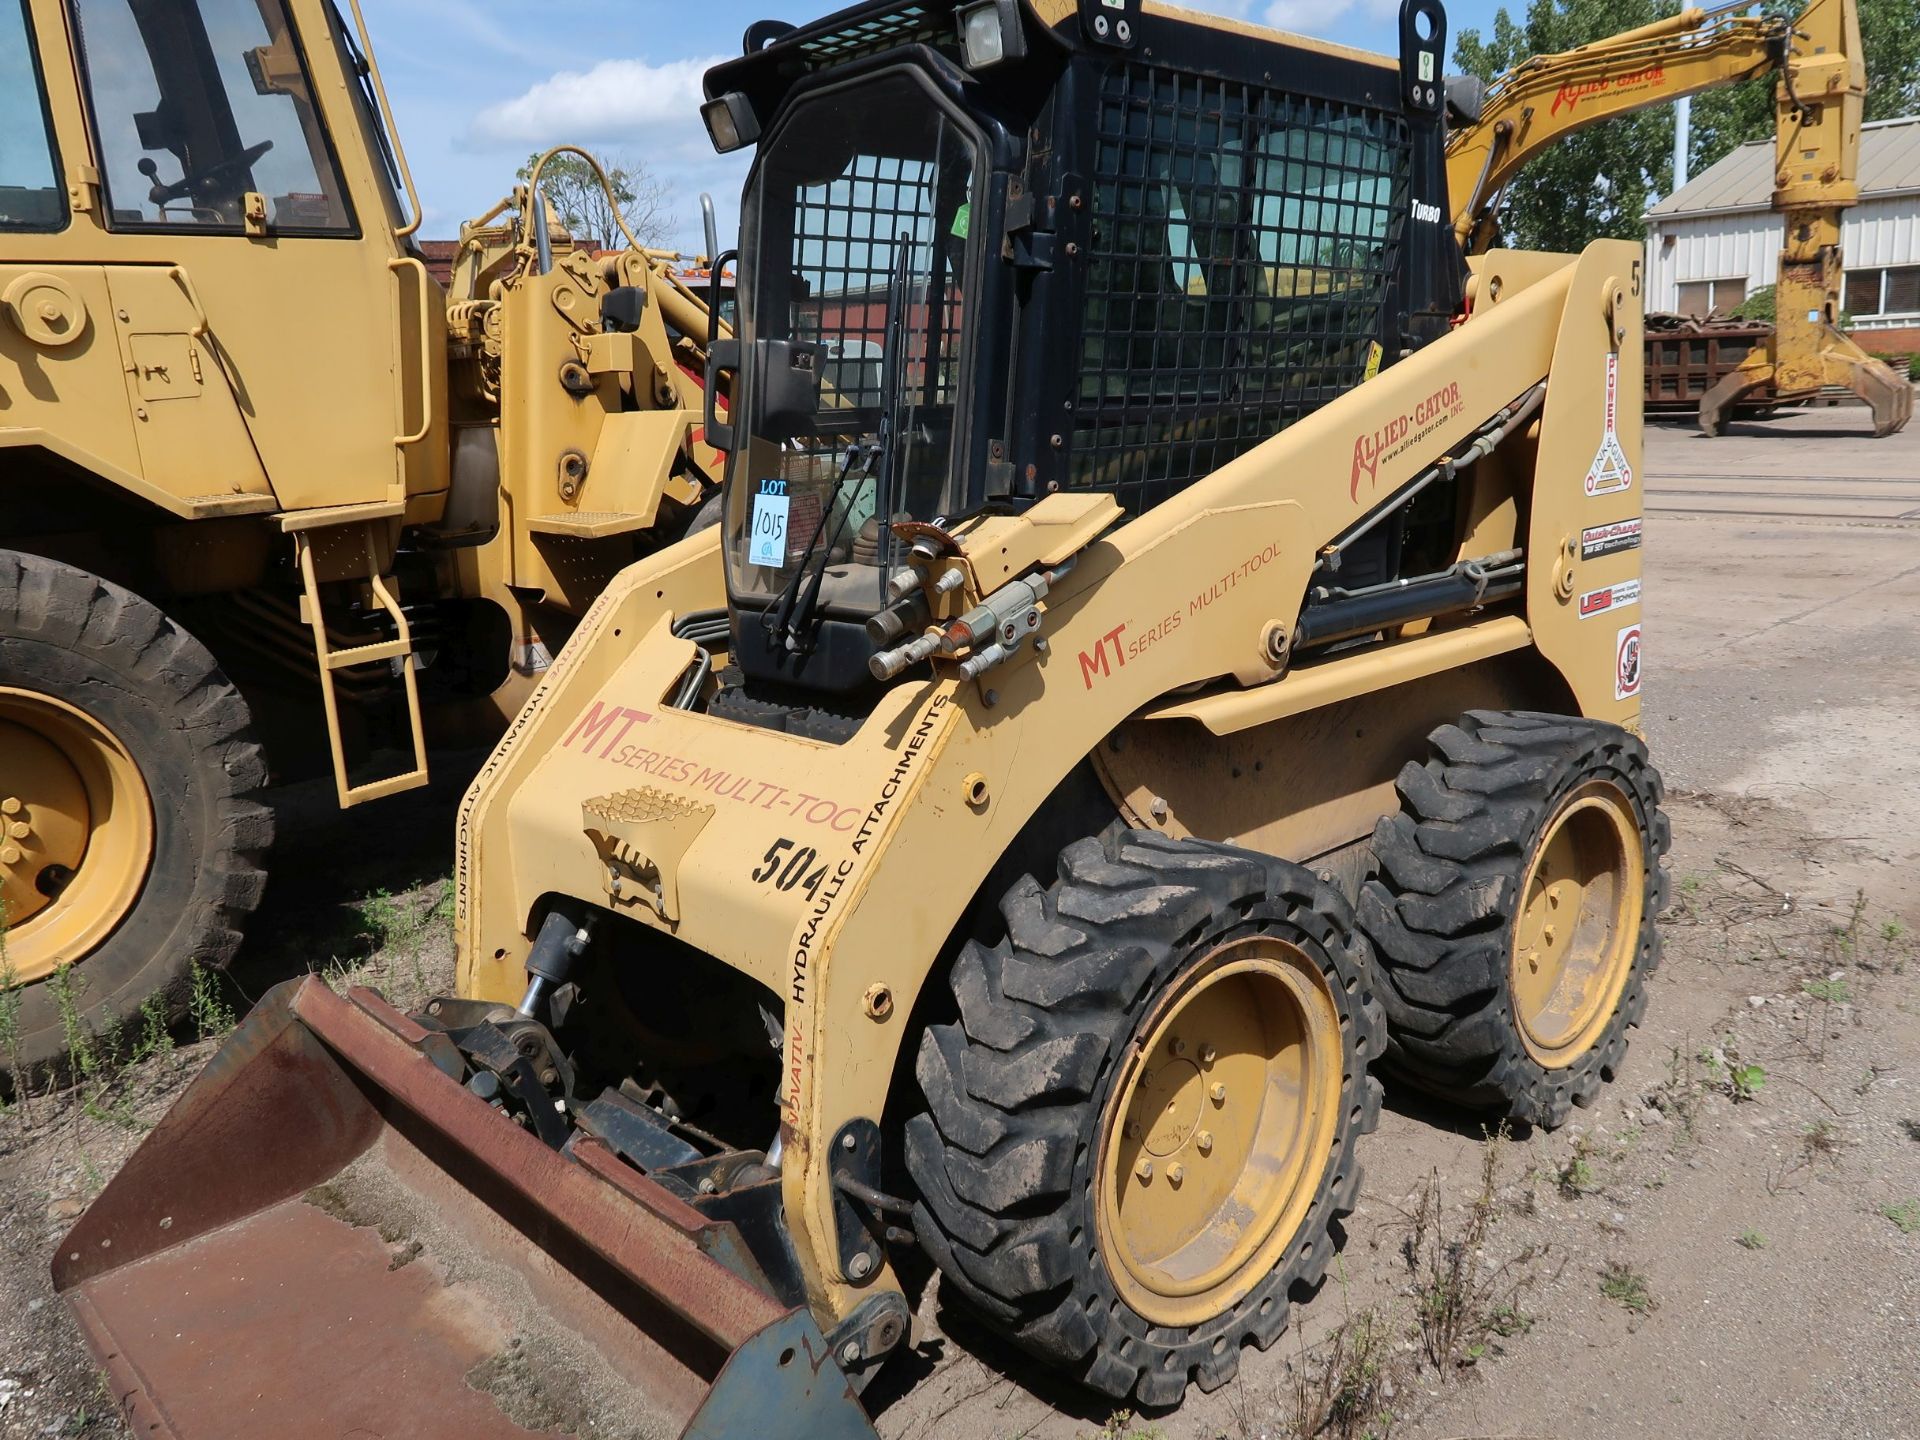 CATERPILLAR MODEL 248B TURBO SKID STEER LOADER; S/N 5CL01248, SOLID TIRE, A/C, FRONT HYDRAULIC (UNIT - Image 5 of 5